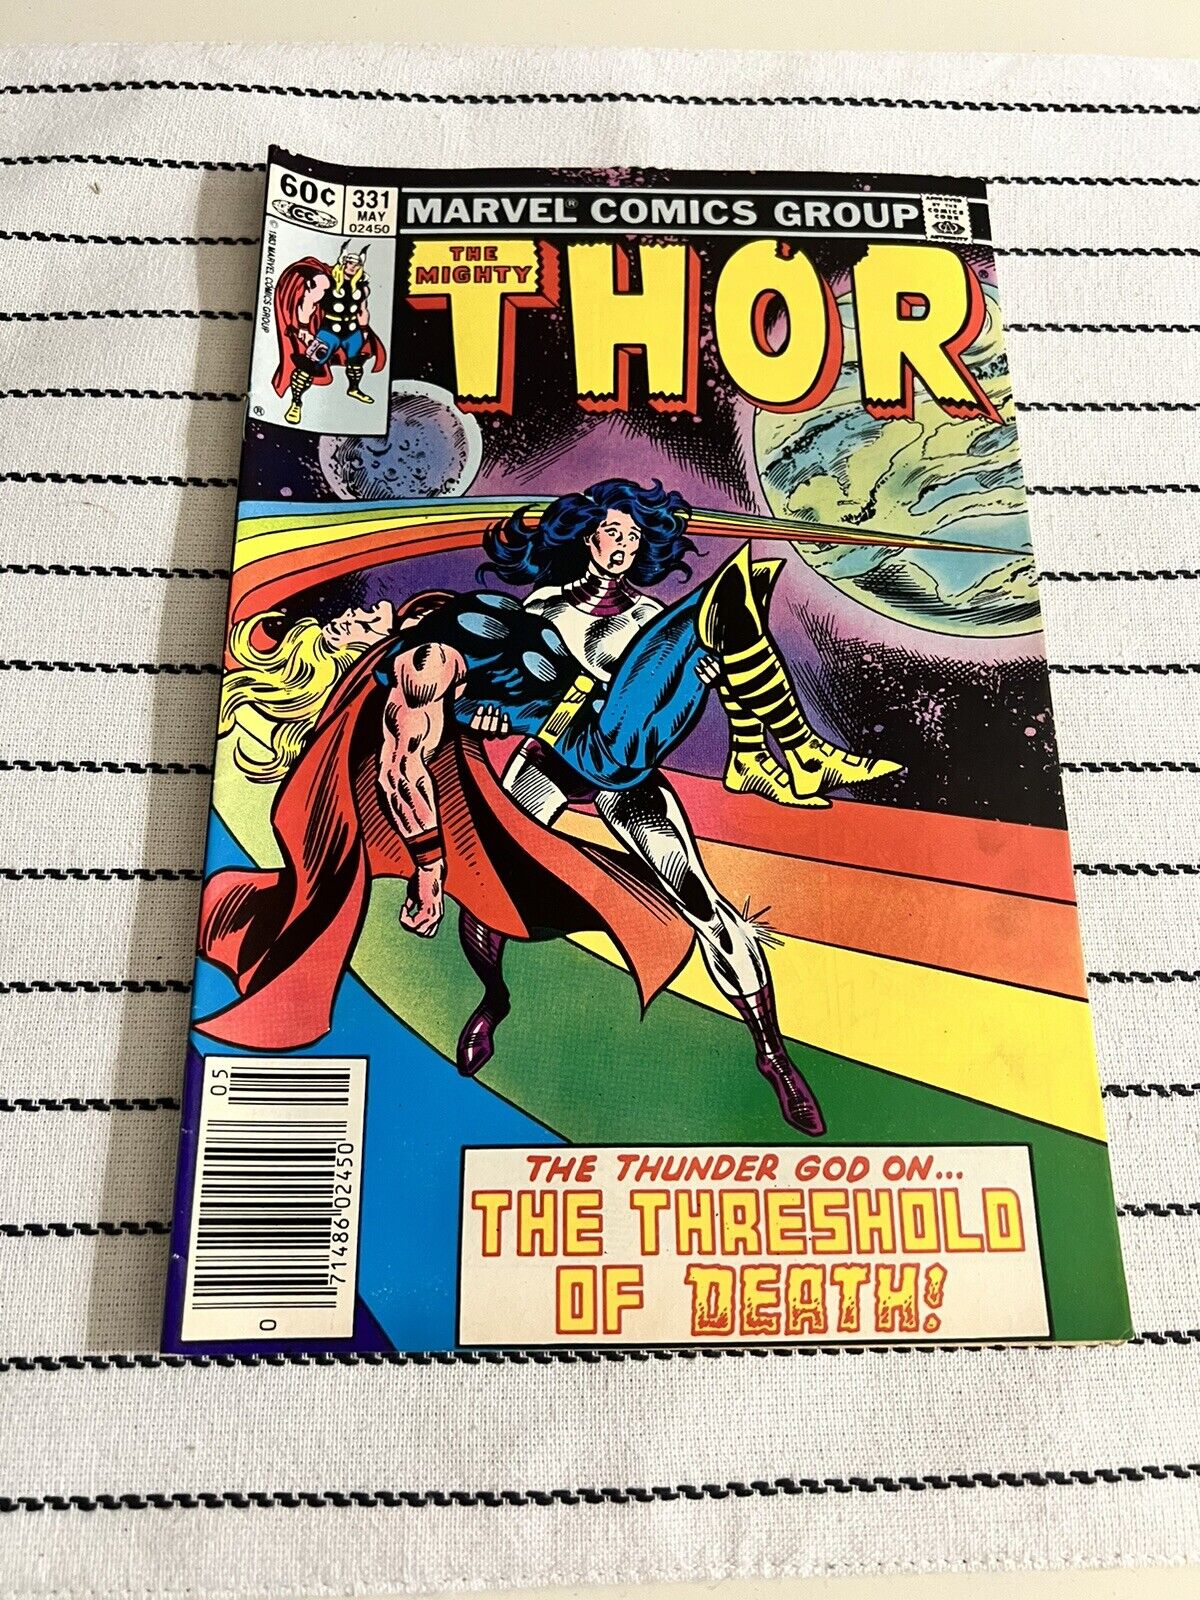 THE MIGHTY THOR #331 MARVEL COMIC BOOK